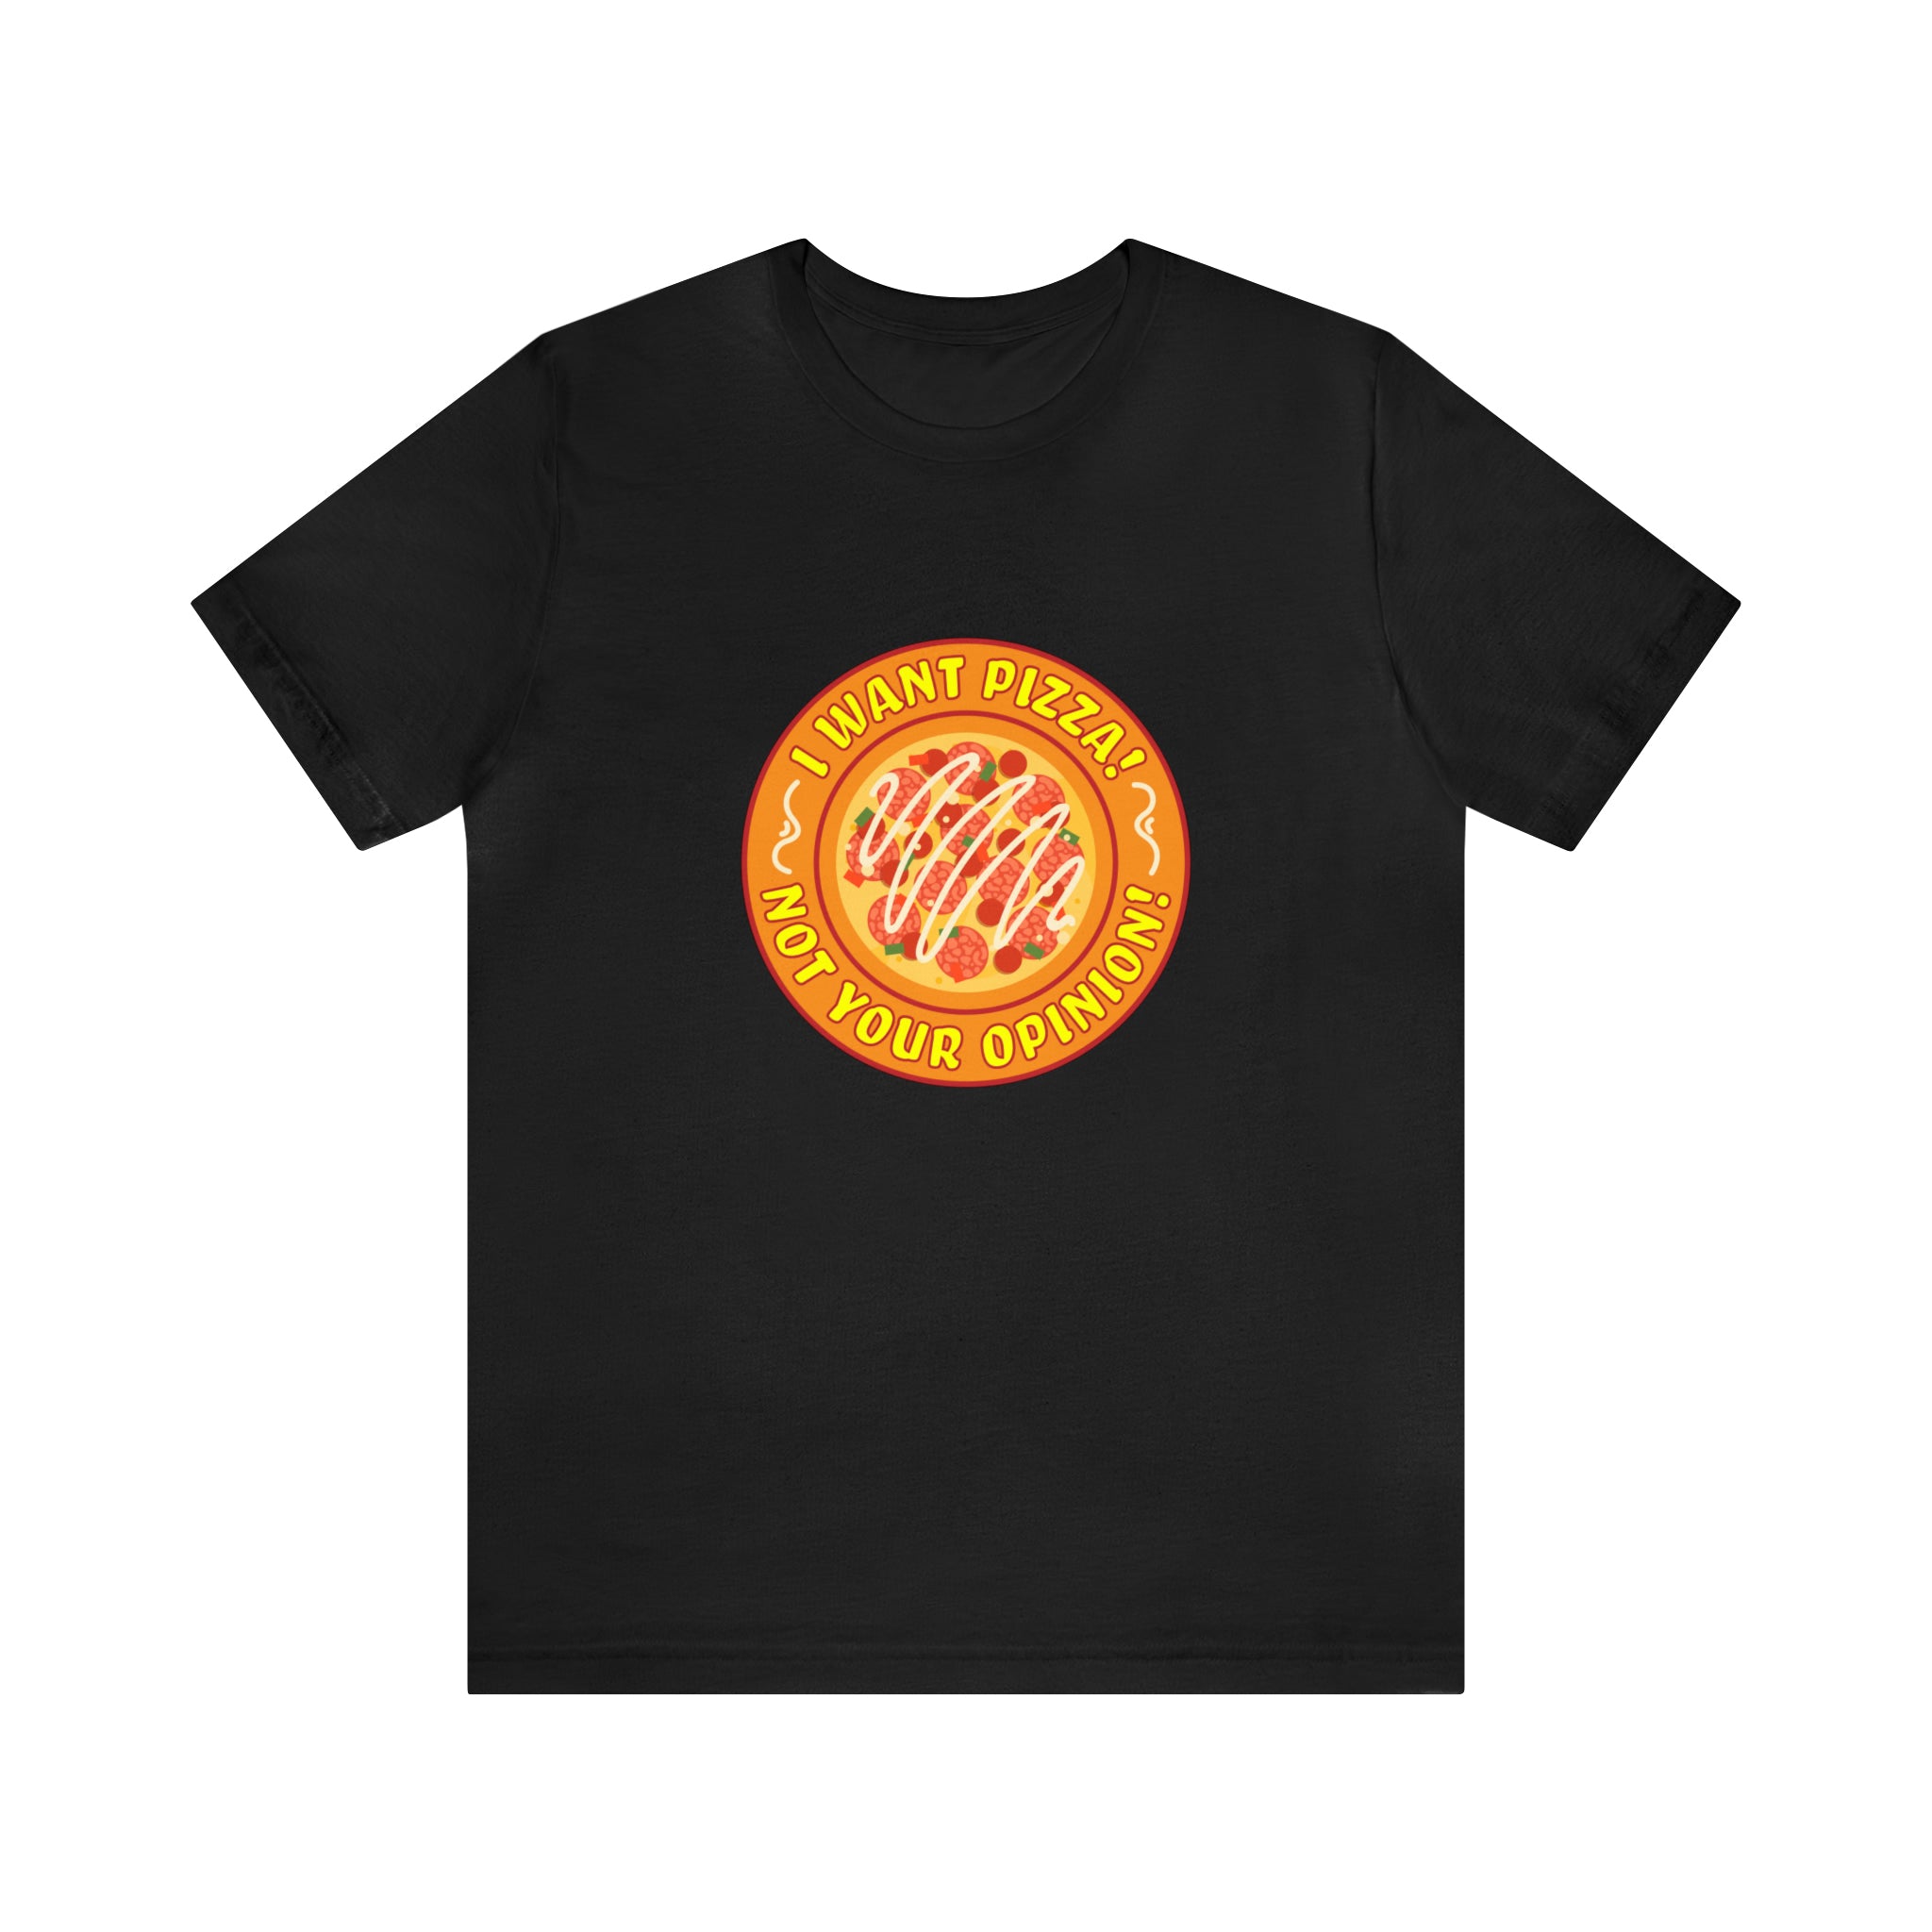 I want pizza not your opinion T-Shirt